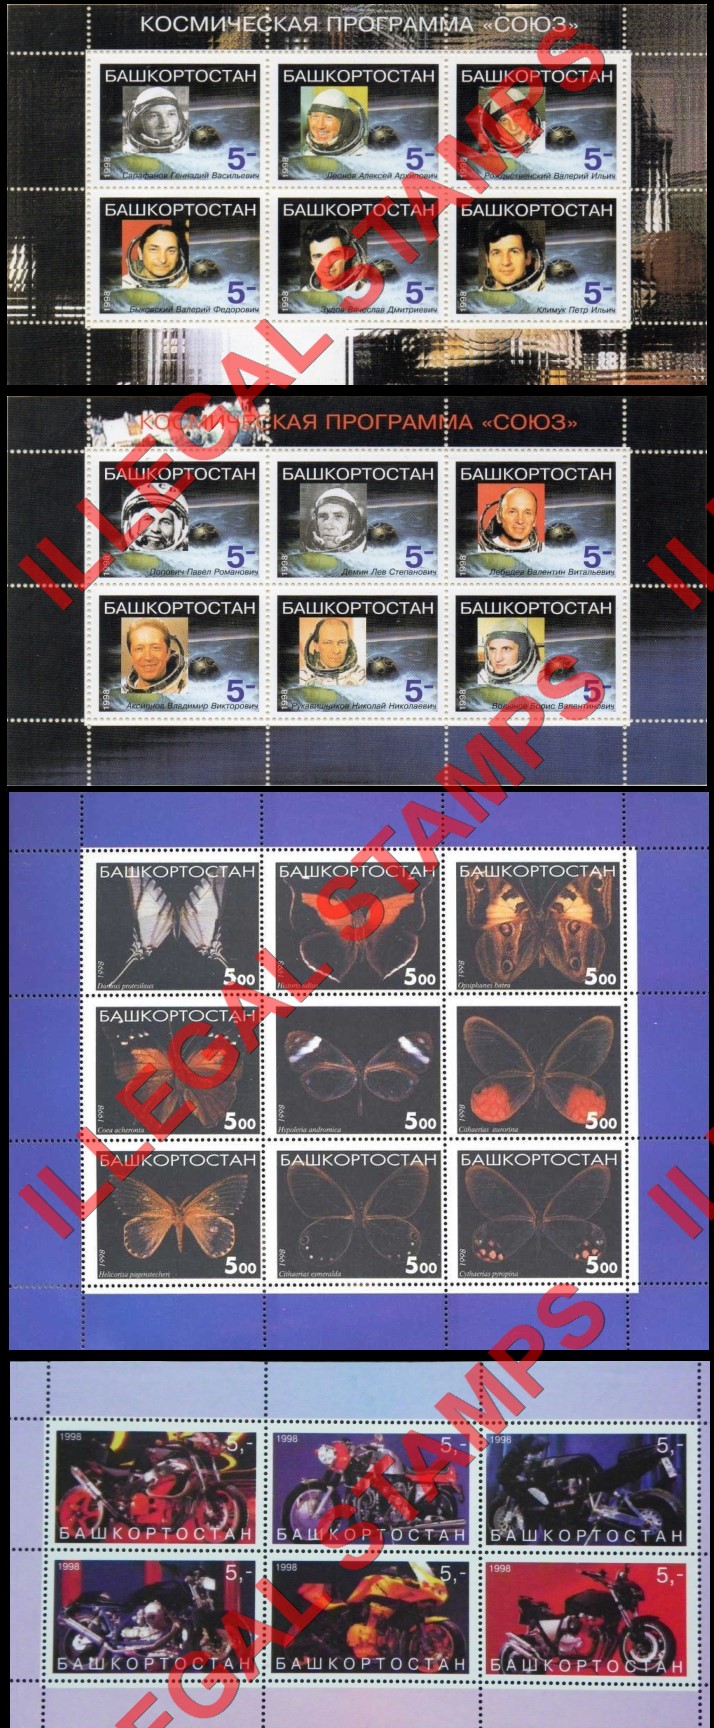 Republic of Bashkortostan 1998 Space Astronauts, Butterflies and Motorcycles Illegal Stamps